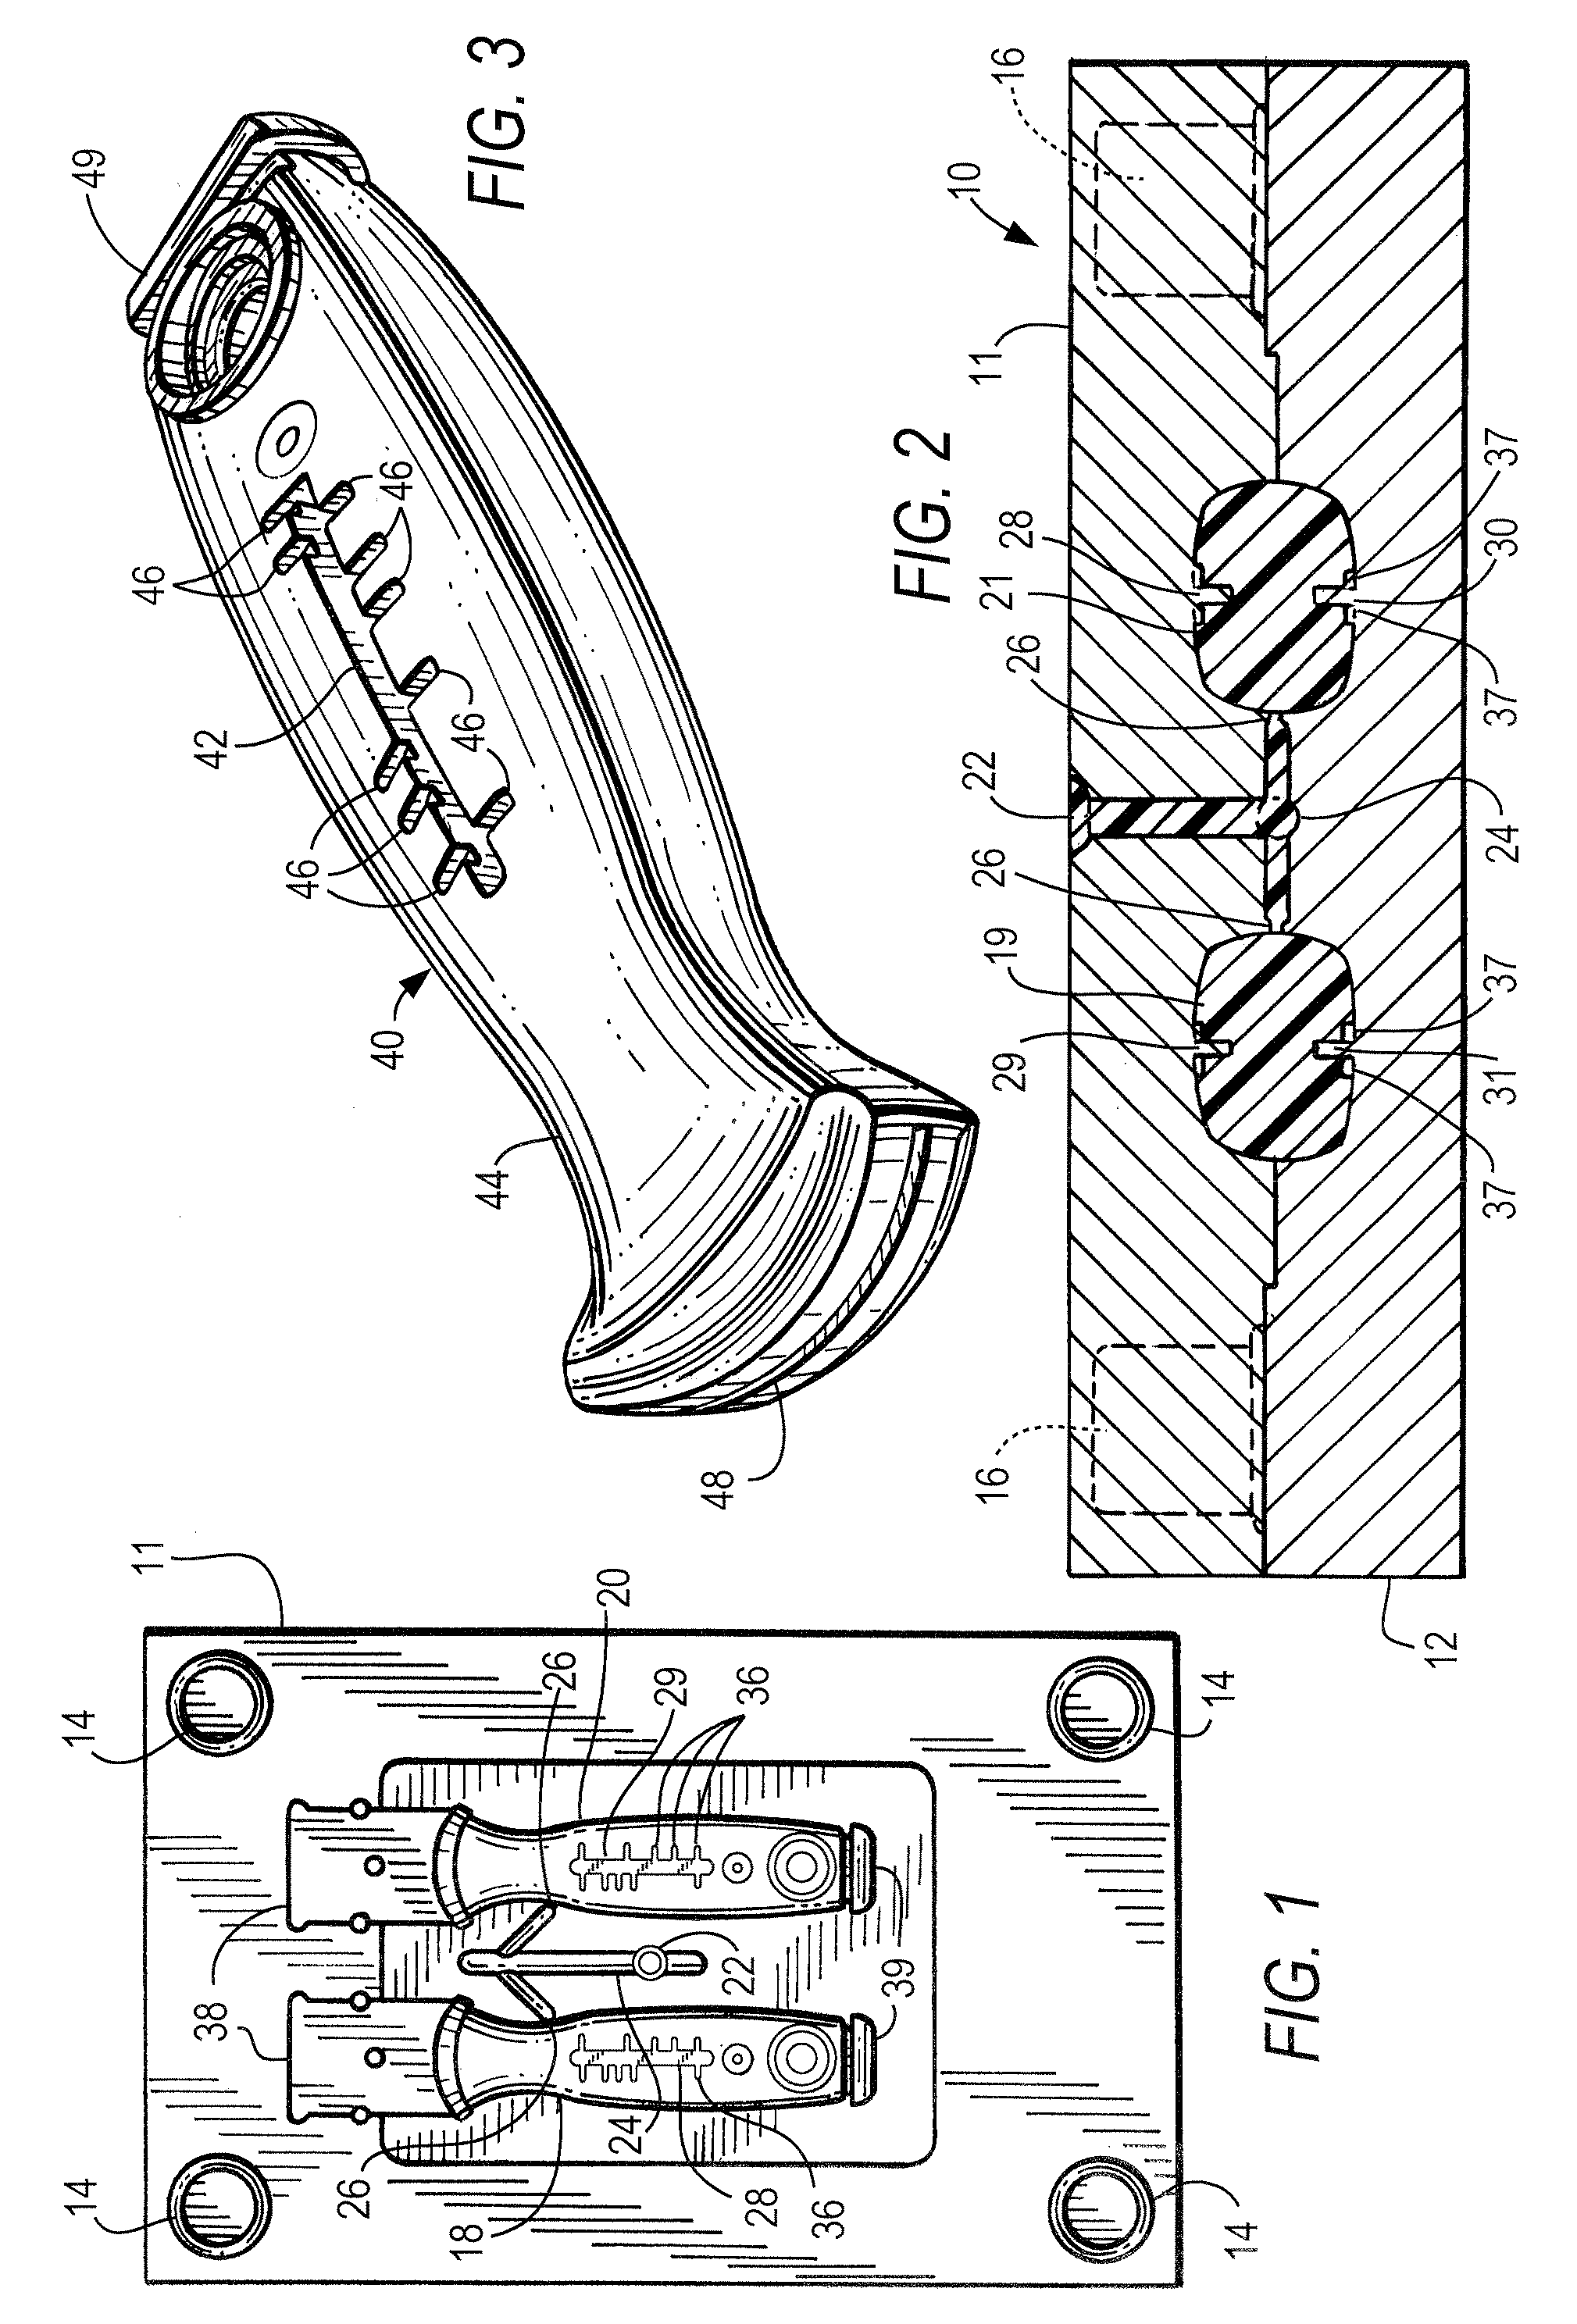 Method of dual molding products with logos and other indicia